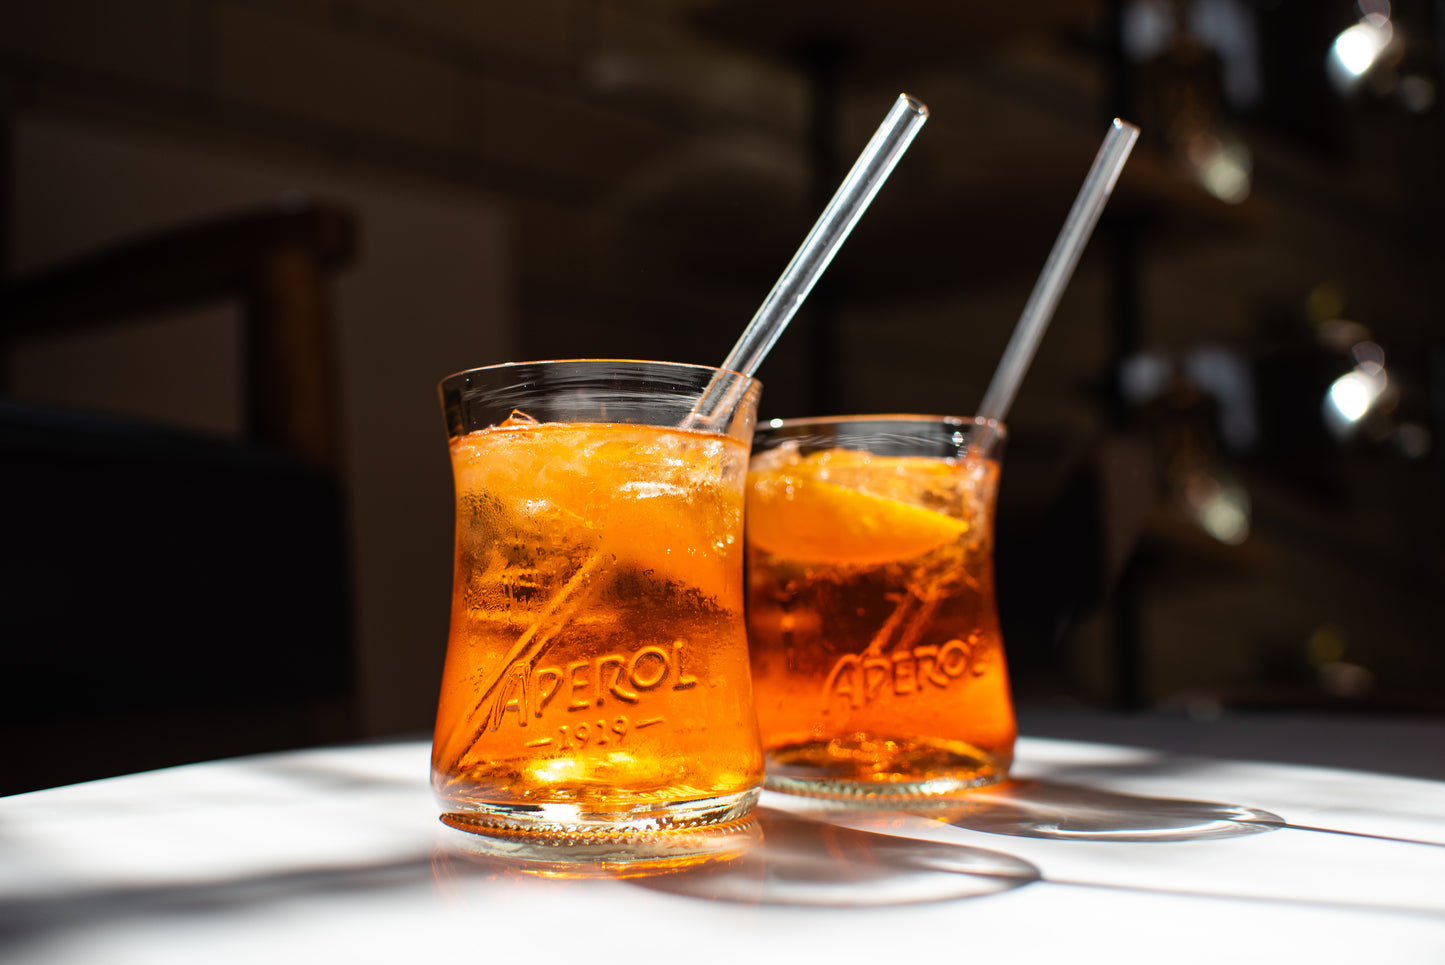 Aperol - Large Spritz Glass : The Whisky Exchange